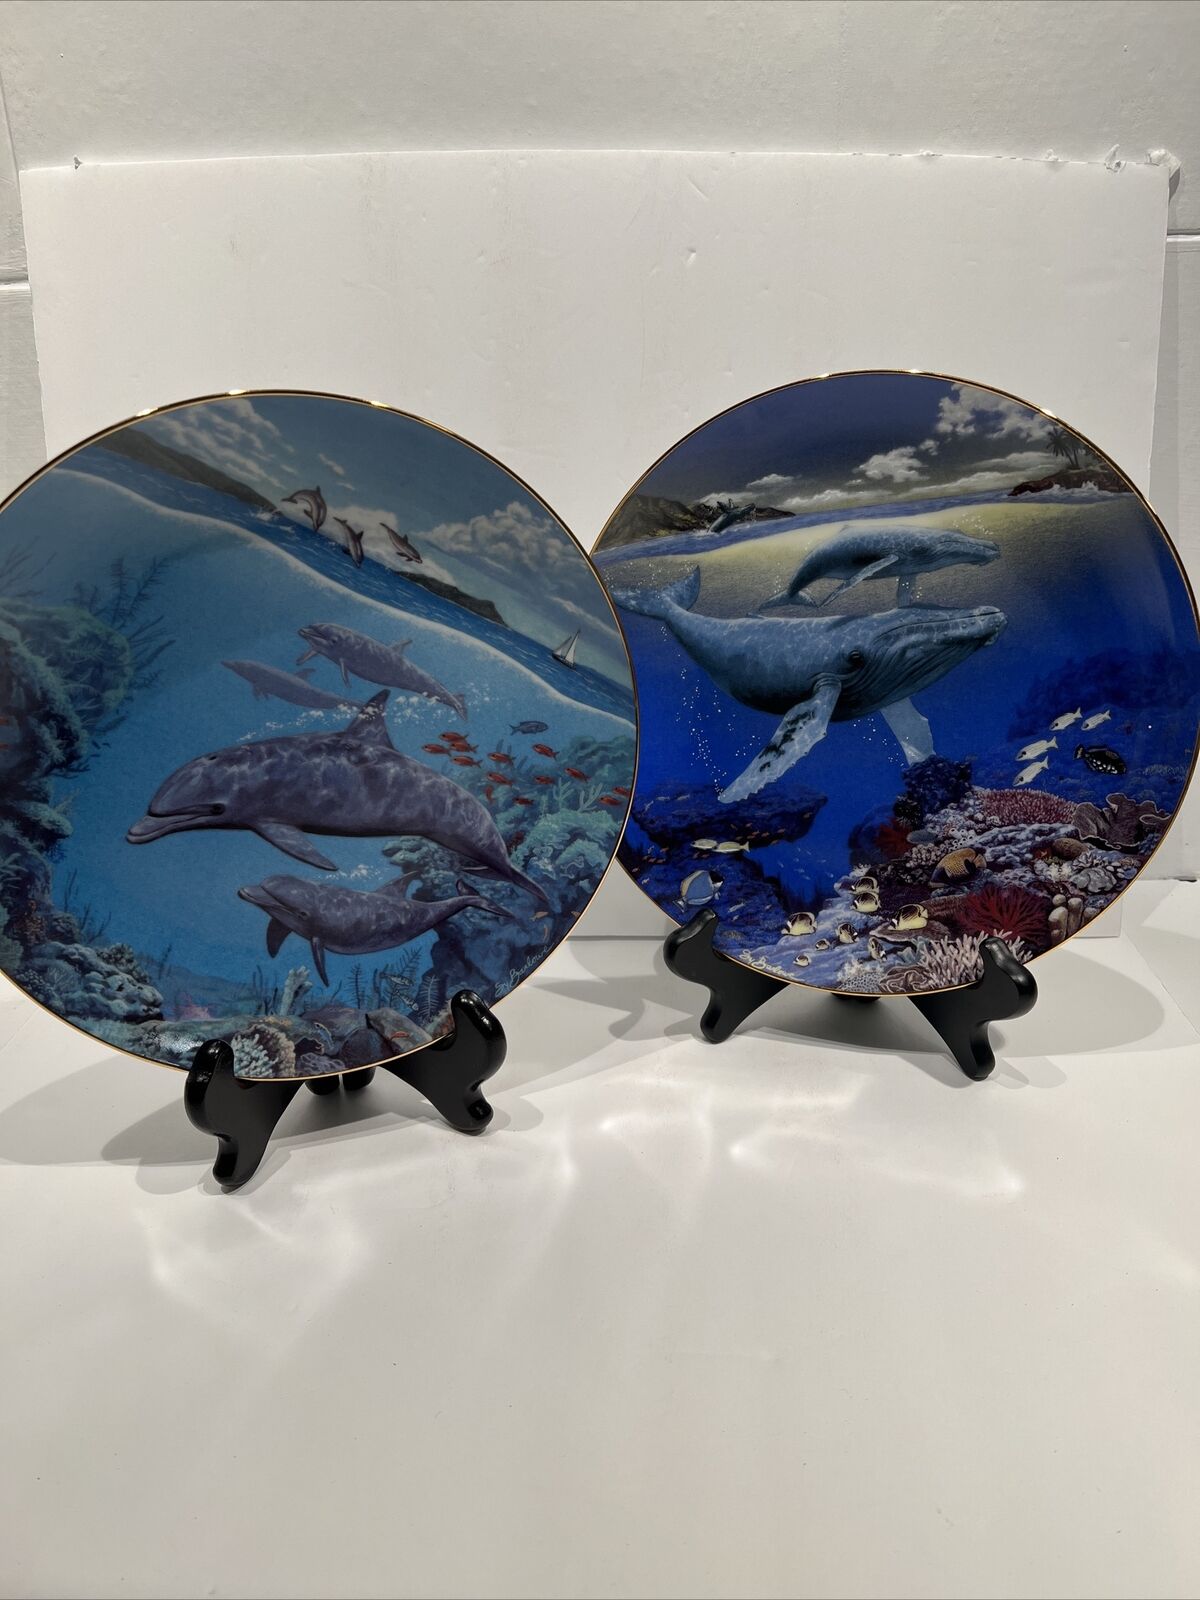 lot of 2 Reco Presents Our Cherished Whale dolfin Decorative Collectors Plate